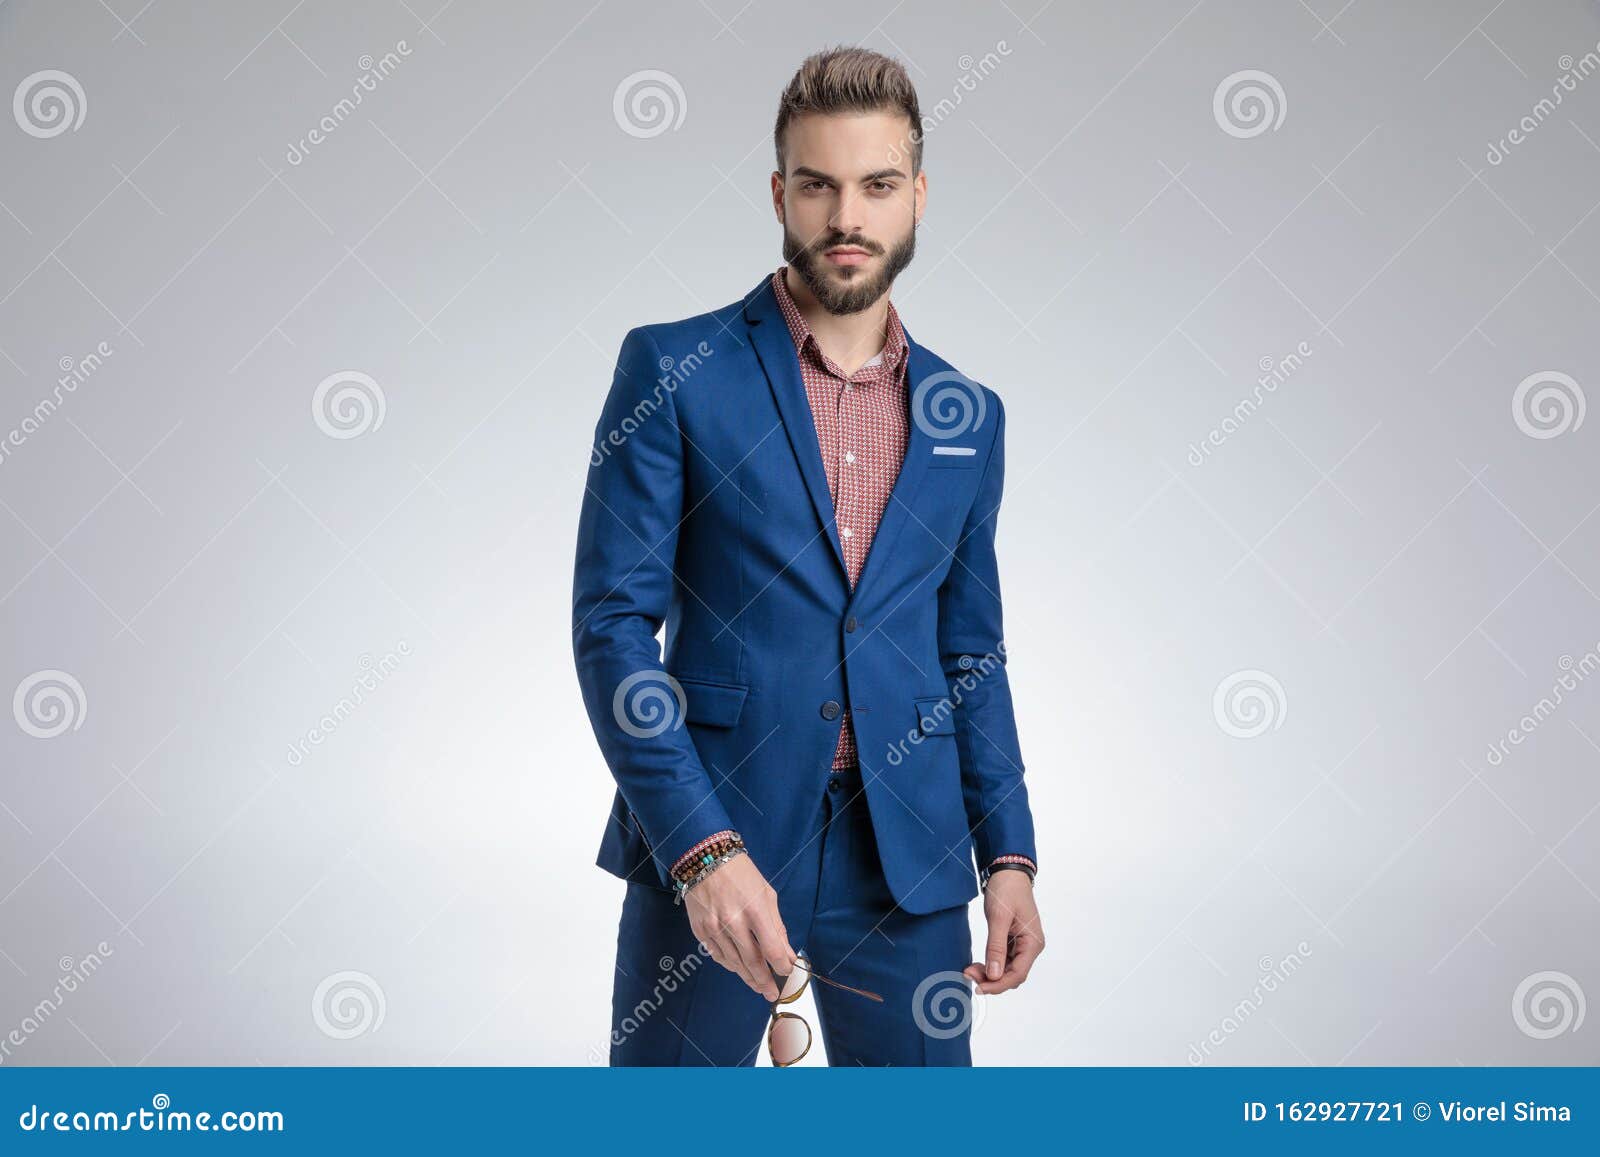 Elegant Man Wearing Blue Suit and Standing in a Fashion Pose Stock ...